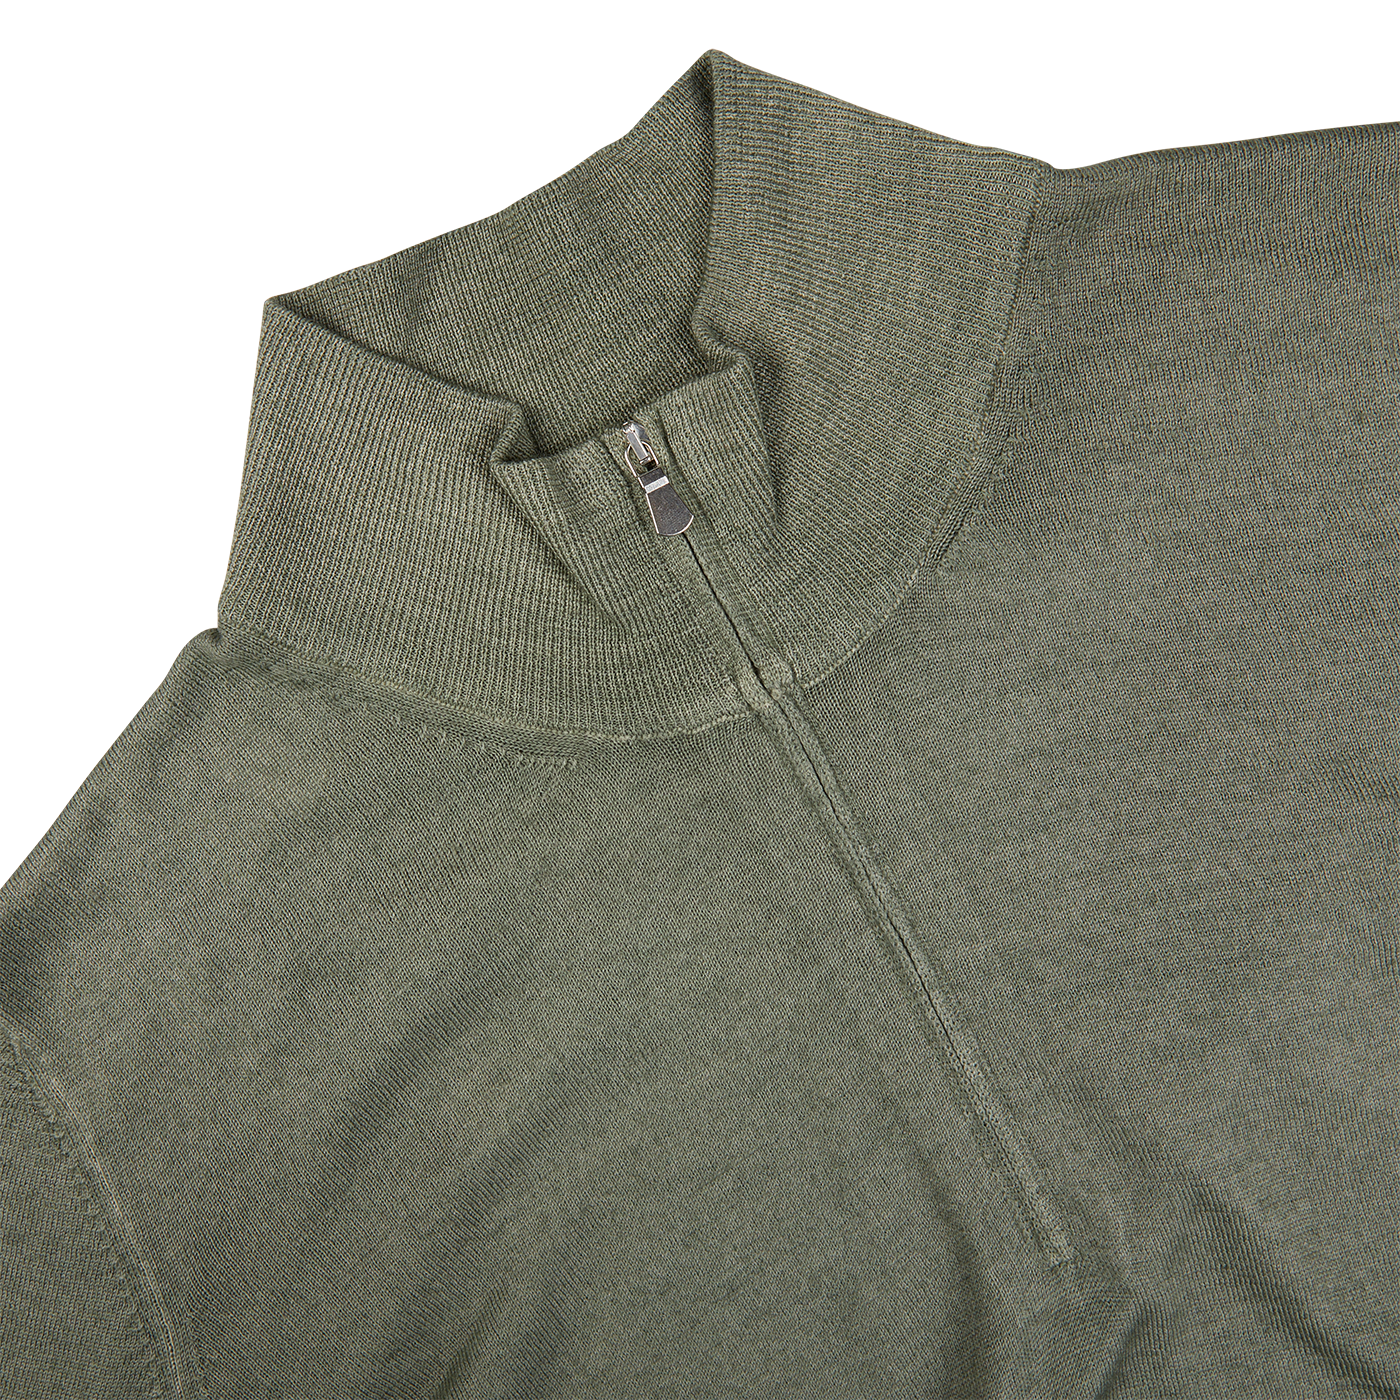 A close up of a Grass Green Vintage Merino Wool 1/4 Zip Sweater with a zipper by Gran Sasso.